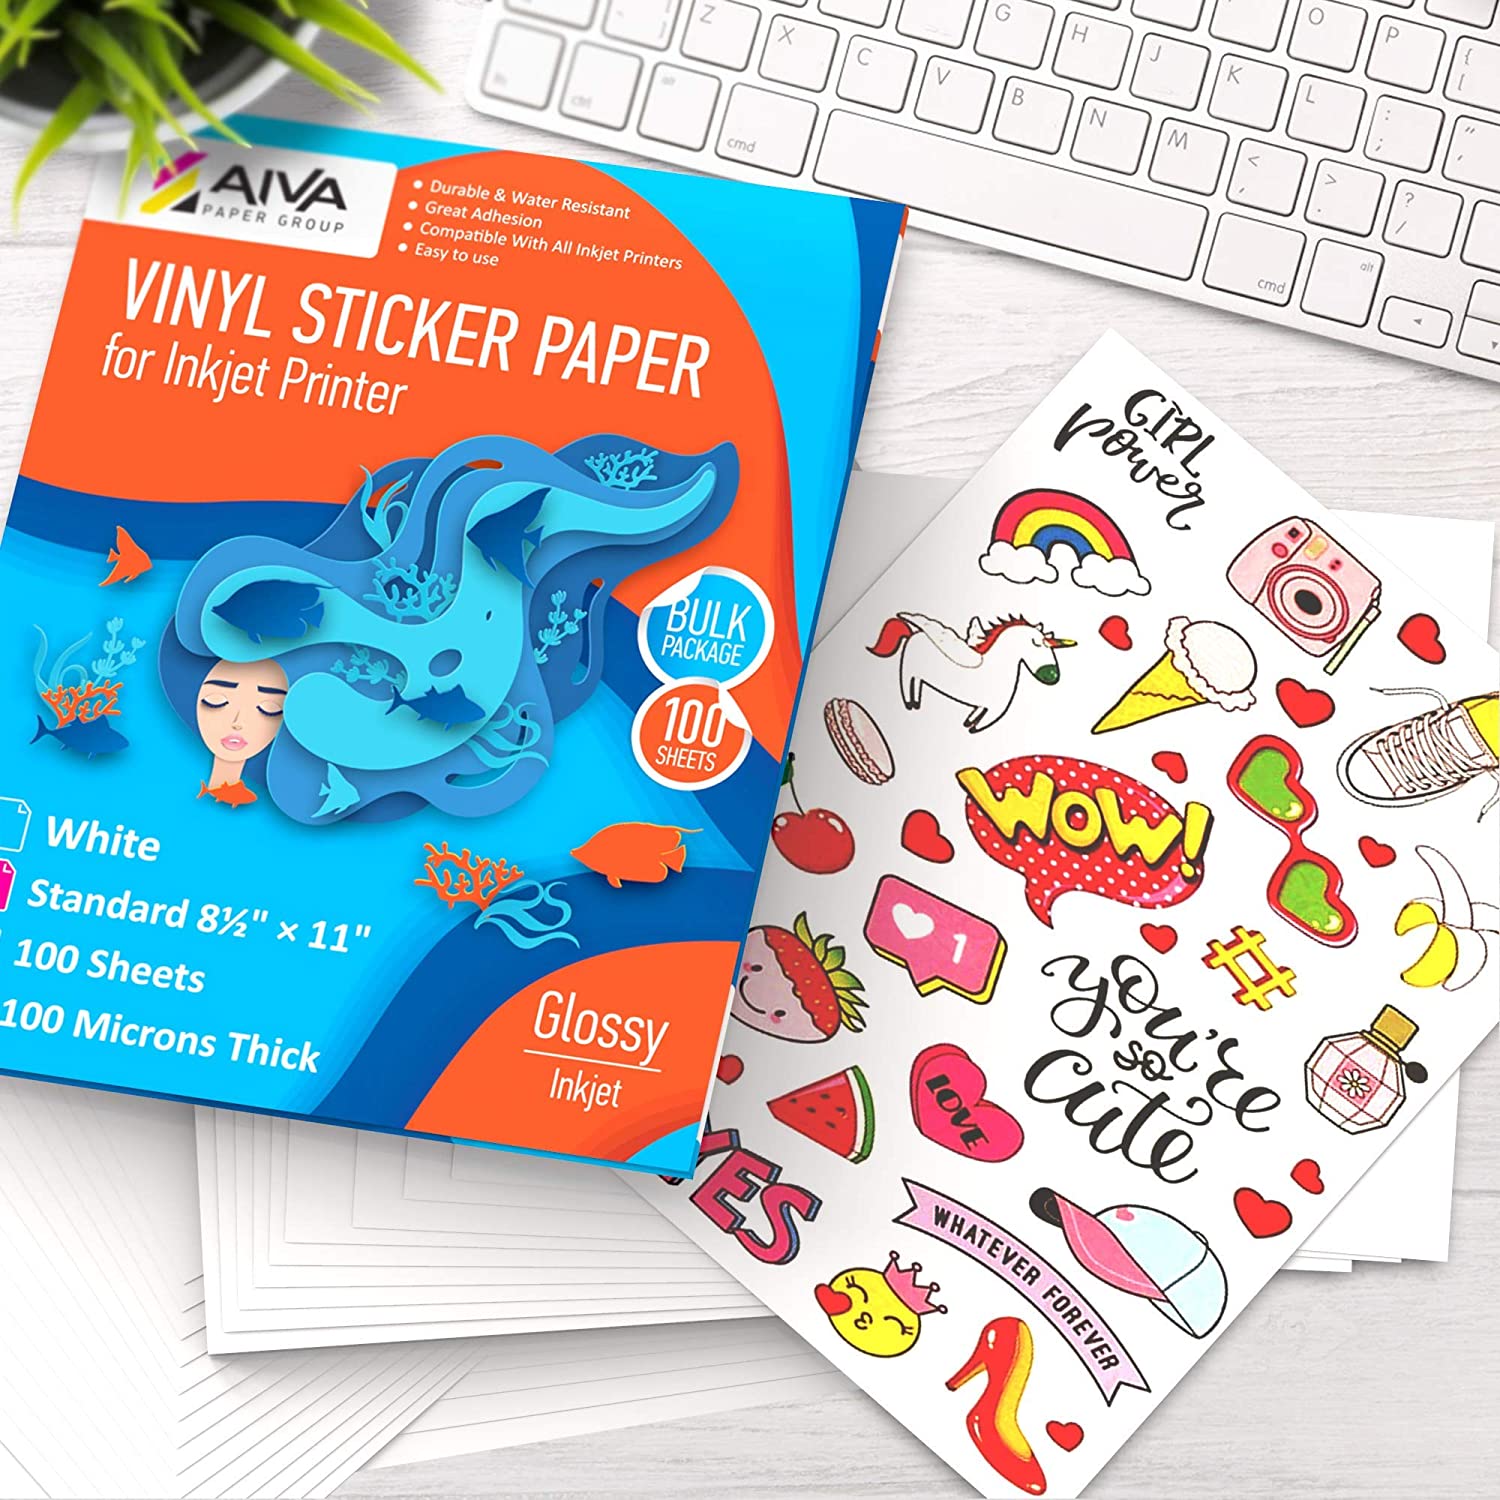 Printable Vinyl Sticker Paper Inkjet Frosty Clear 15 sheets – AIVA Paper  Group